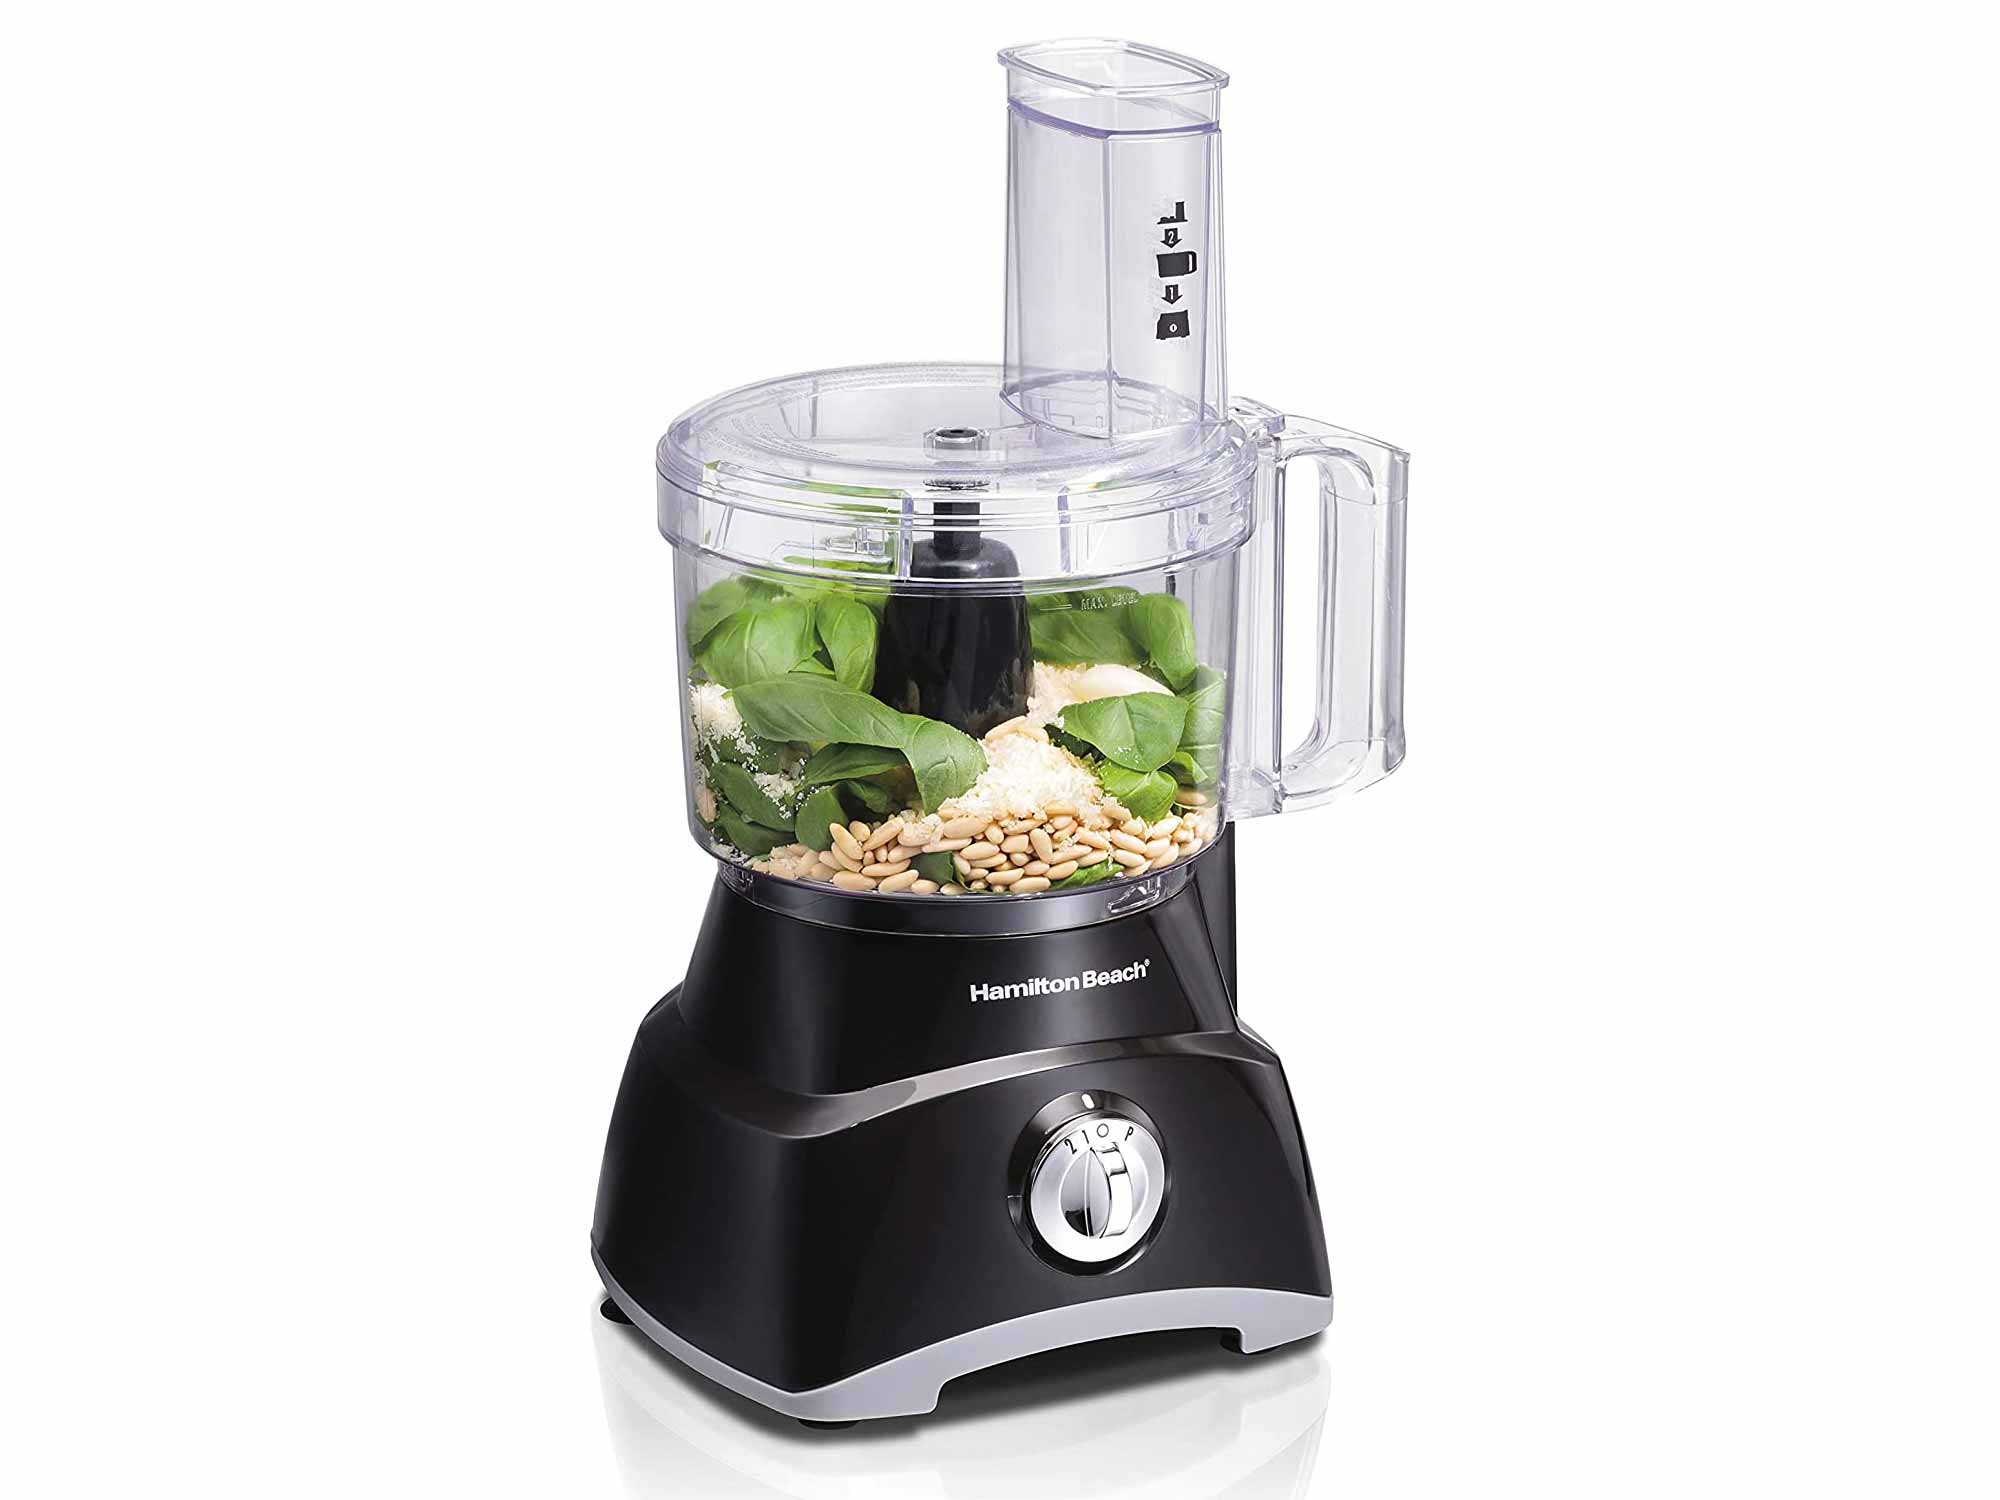 Hamilton Beach 8-Cup Compact Food Processor & Vegetable Chopper for Slicing, Shredding, Mincing, and Puree, 450 Watts, Black